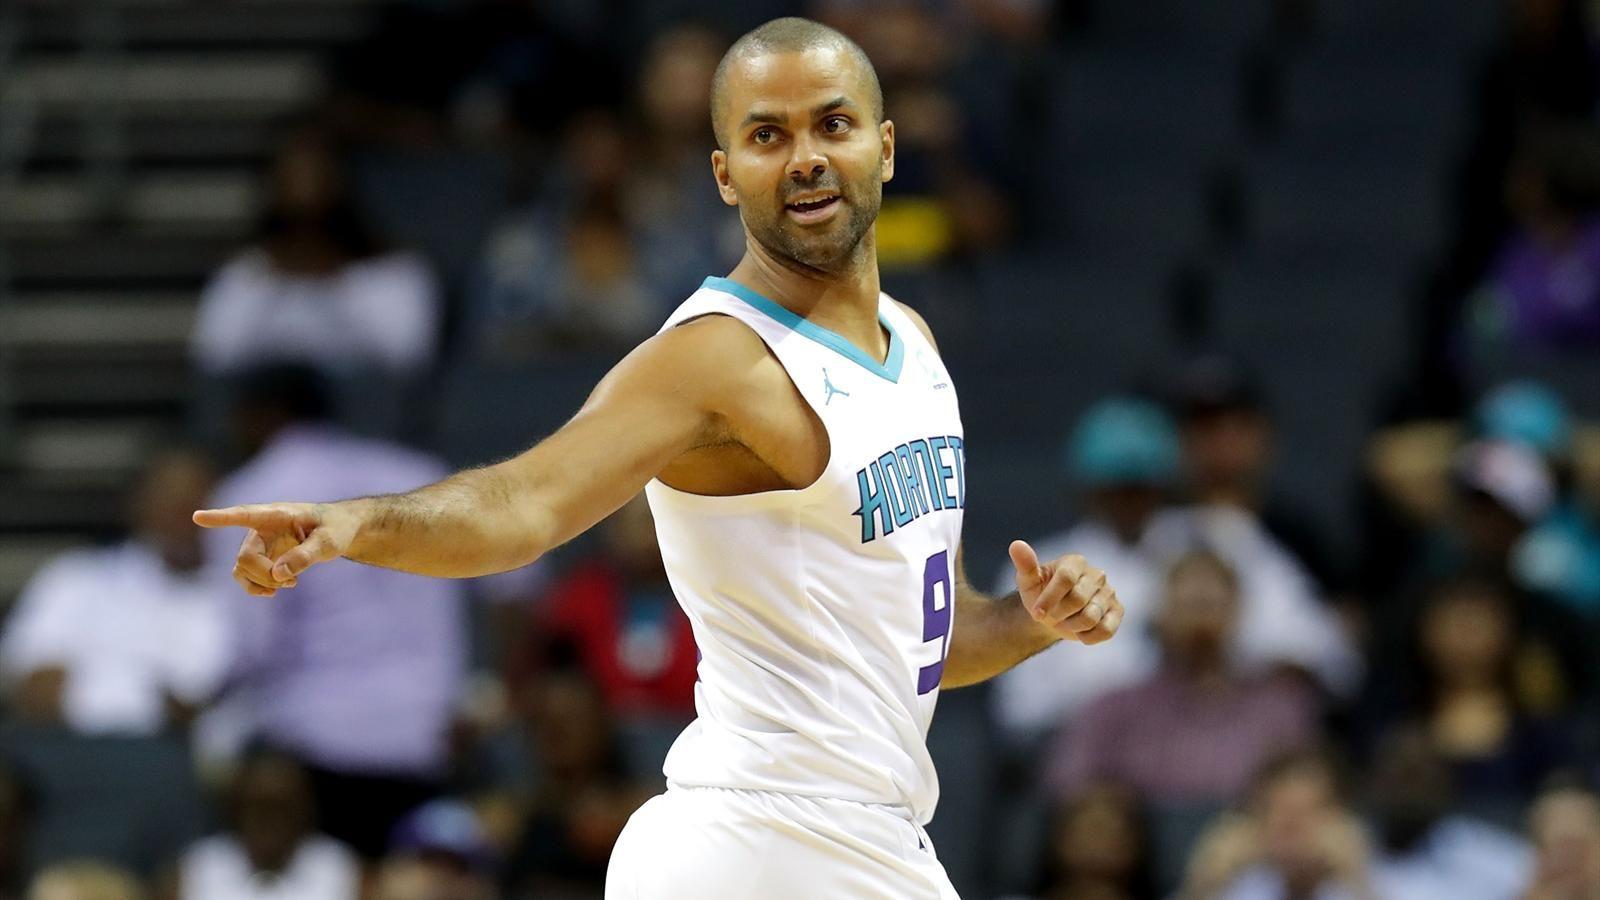 Tony Parker, as in the good old days